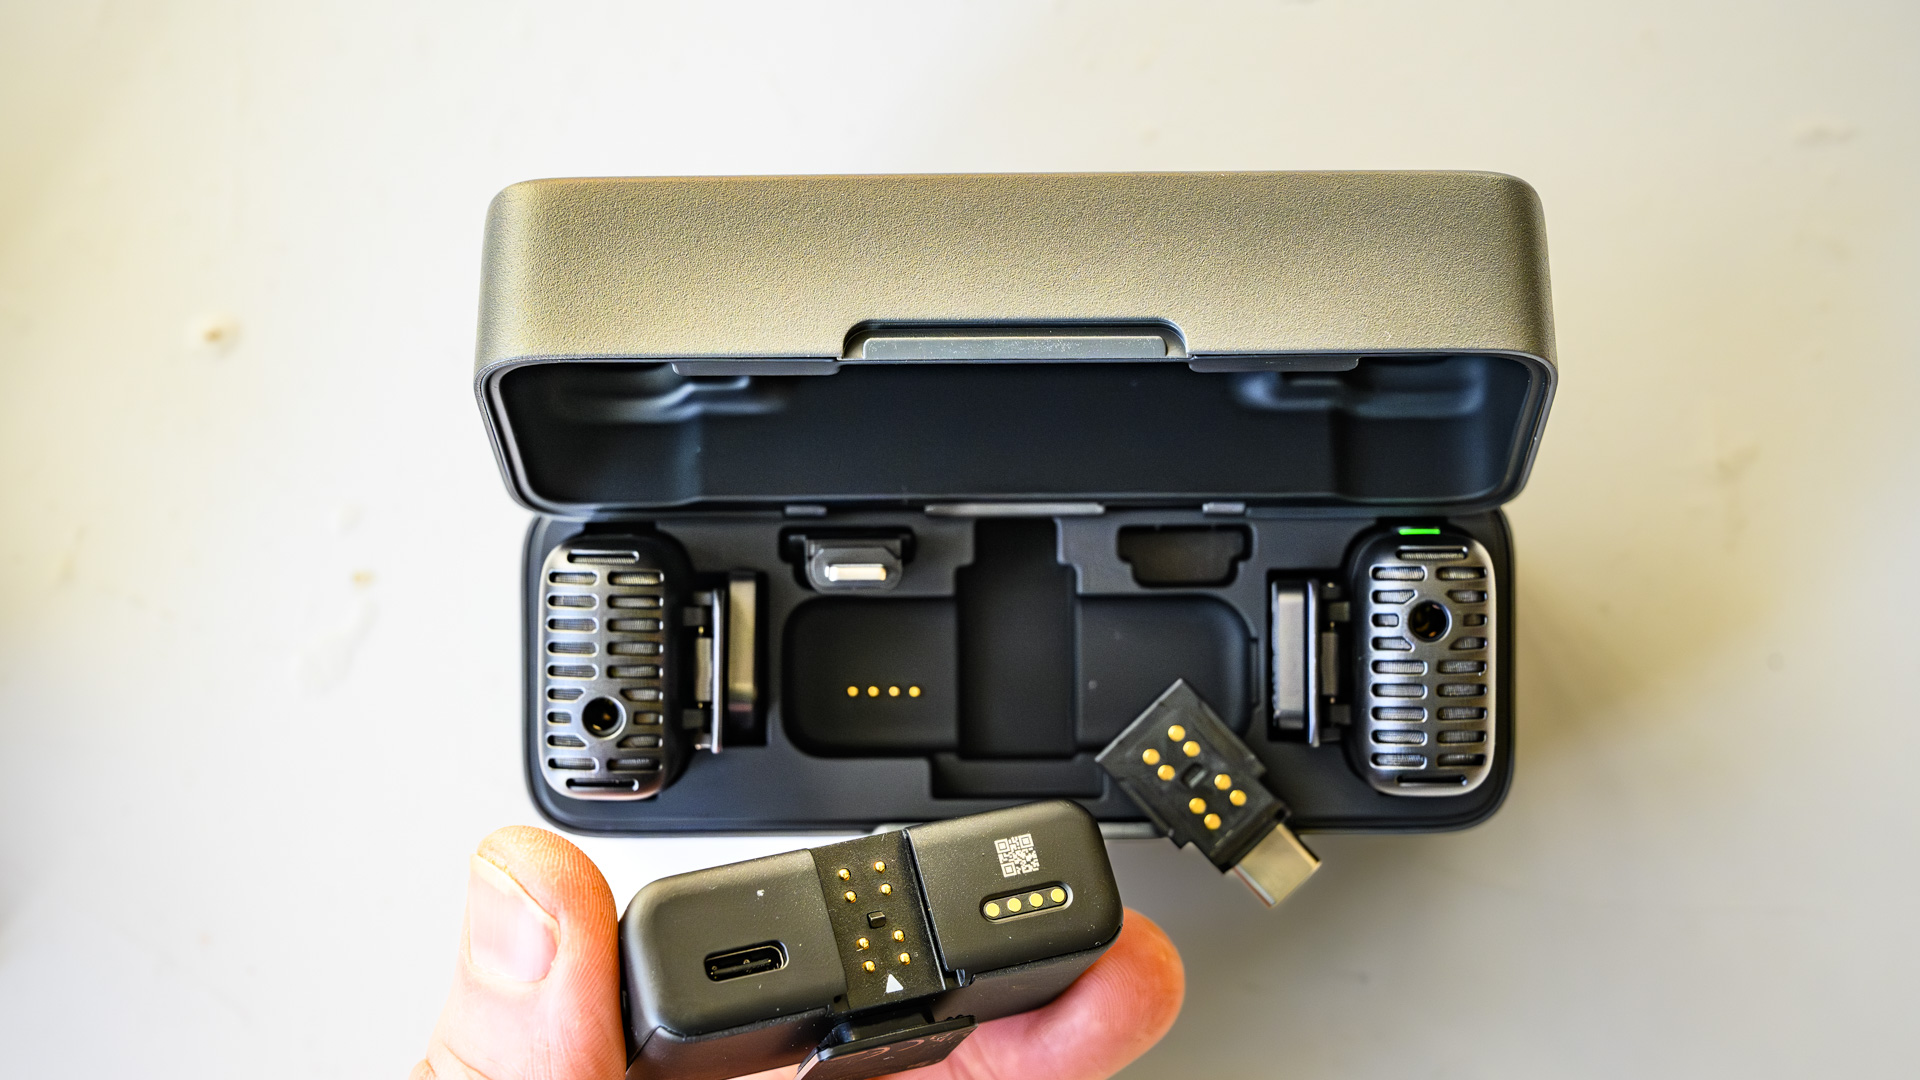 DJI Mic 2 charging case from above with lid open and receiver removed